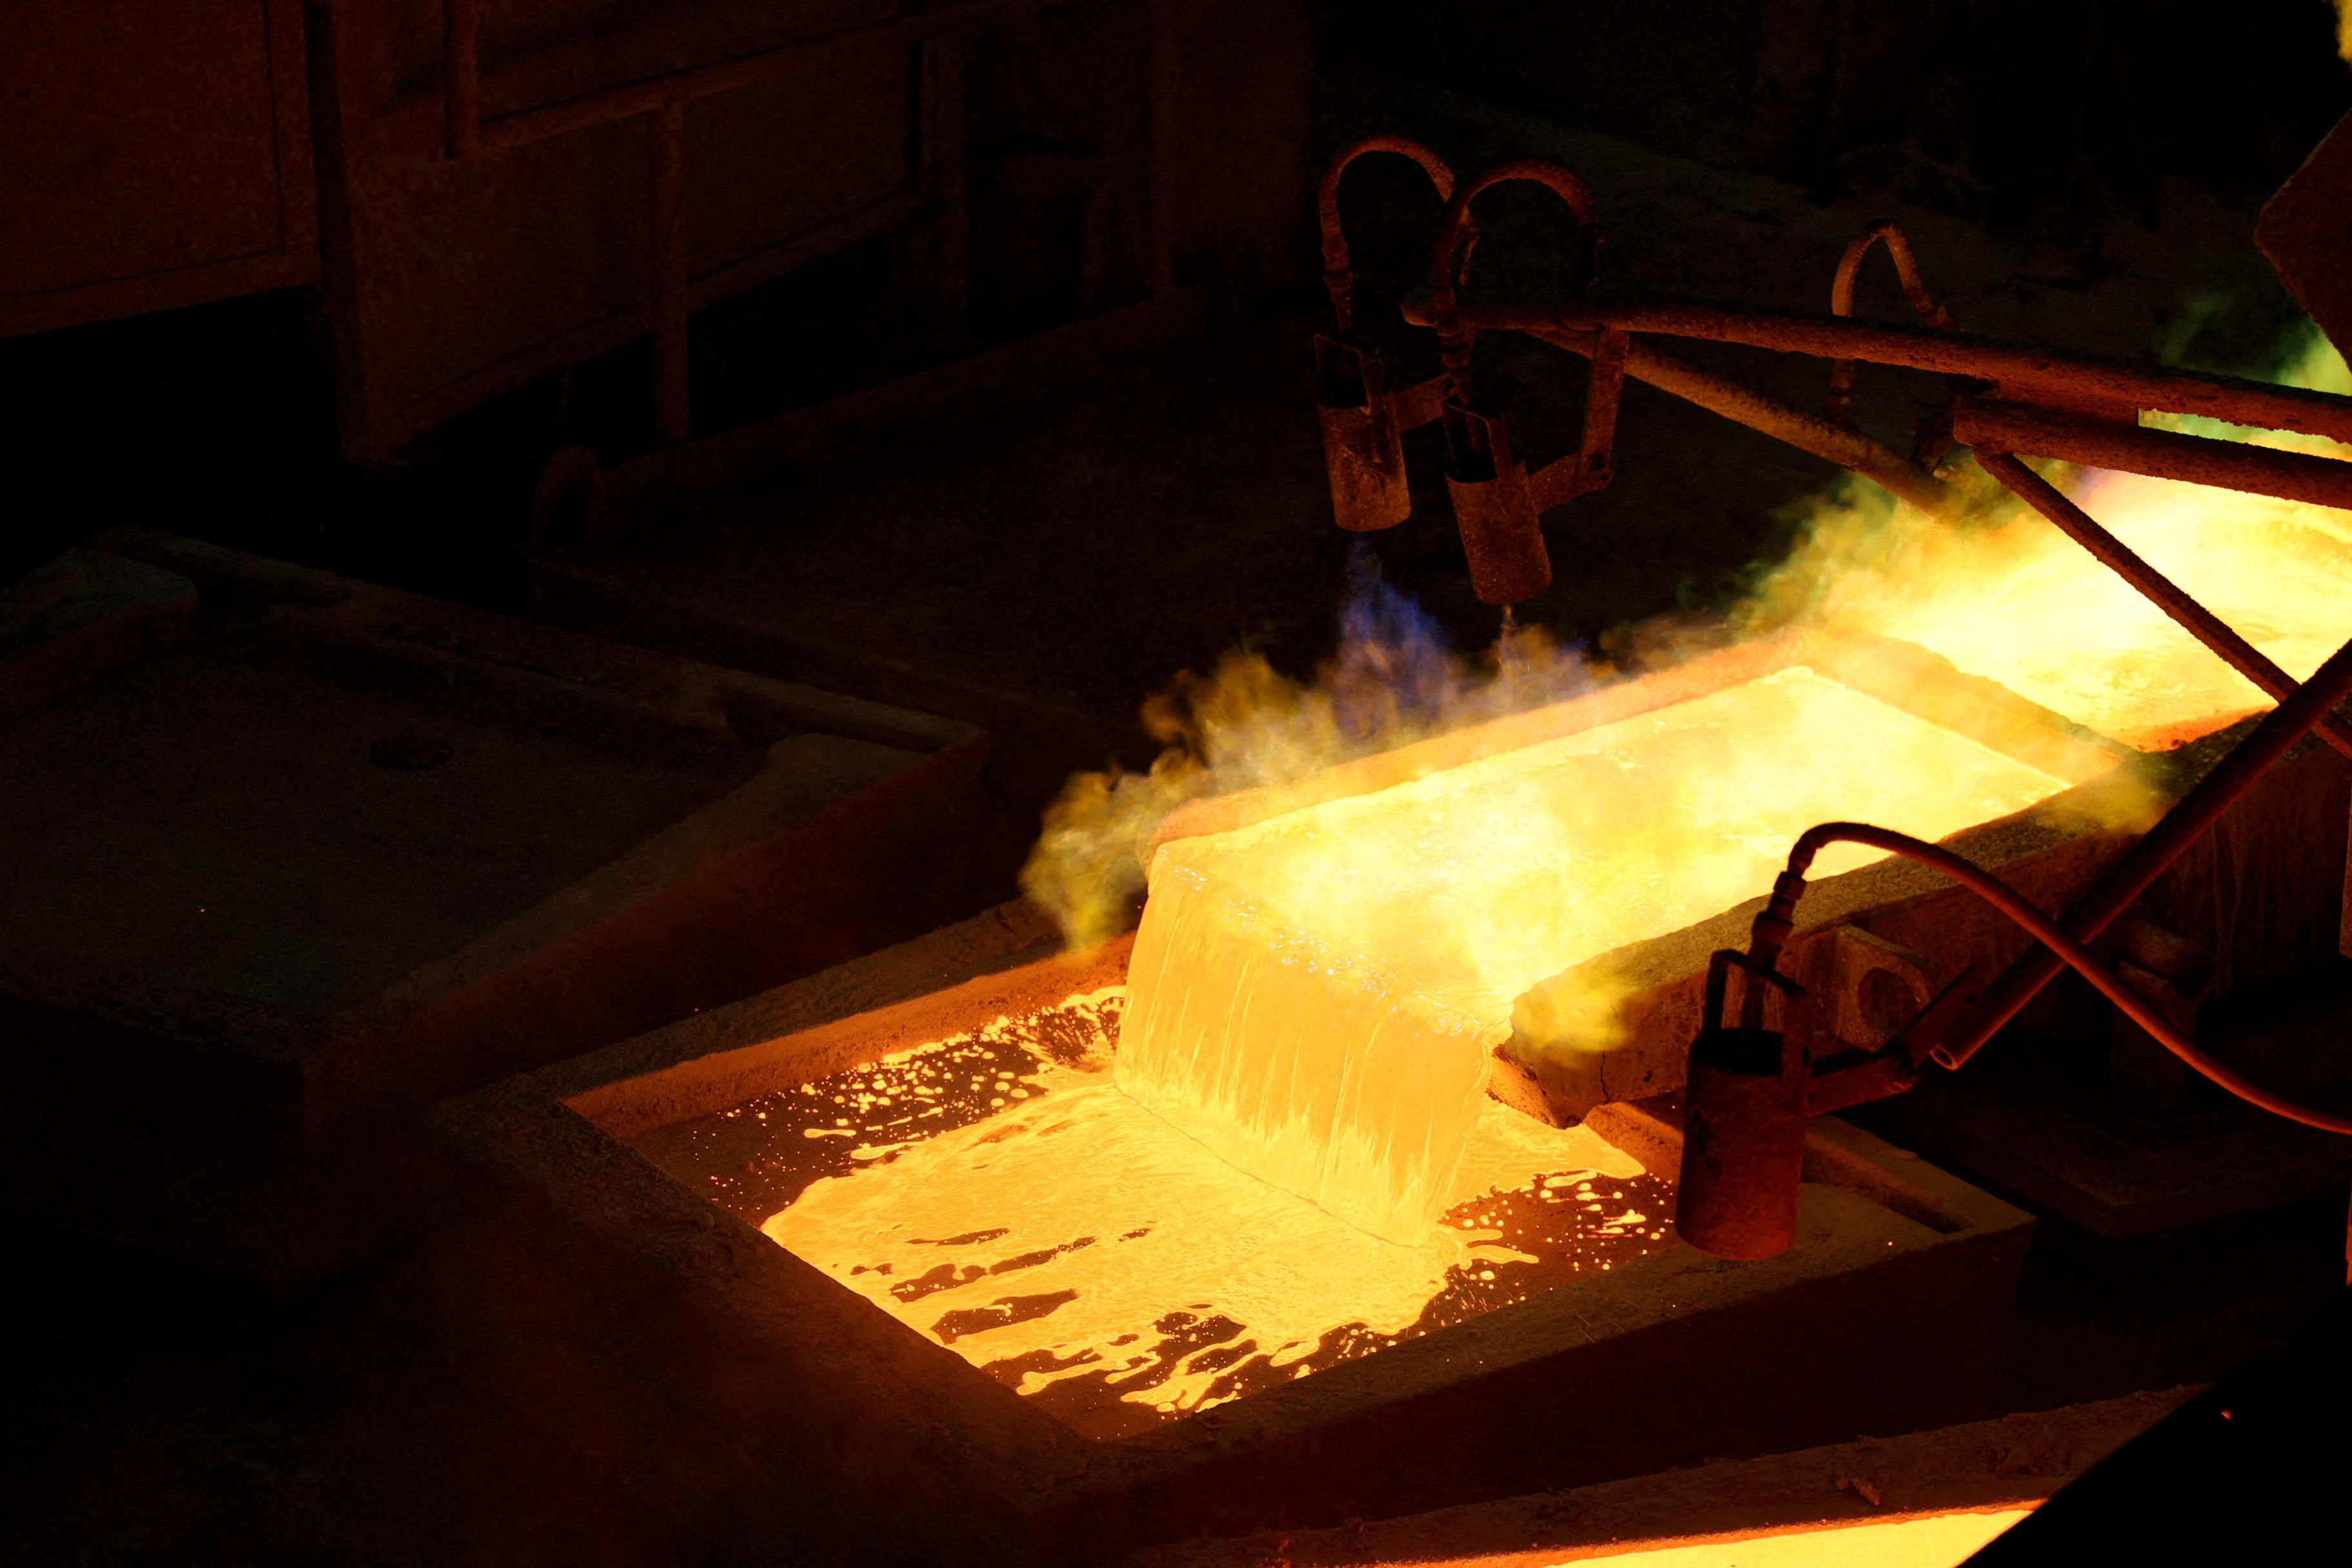 A view of molten copper at Anglo American's smelter in Chagres, Chile